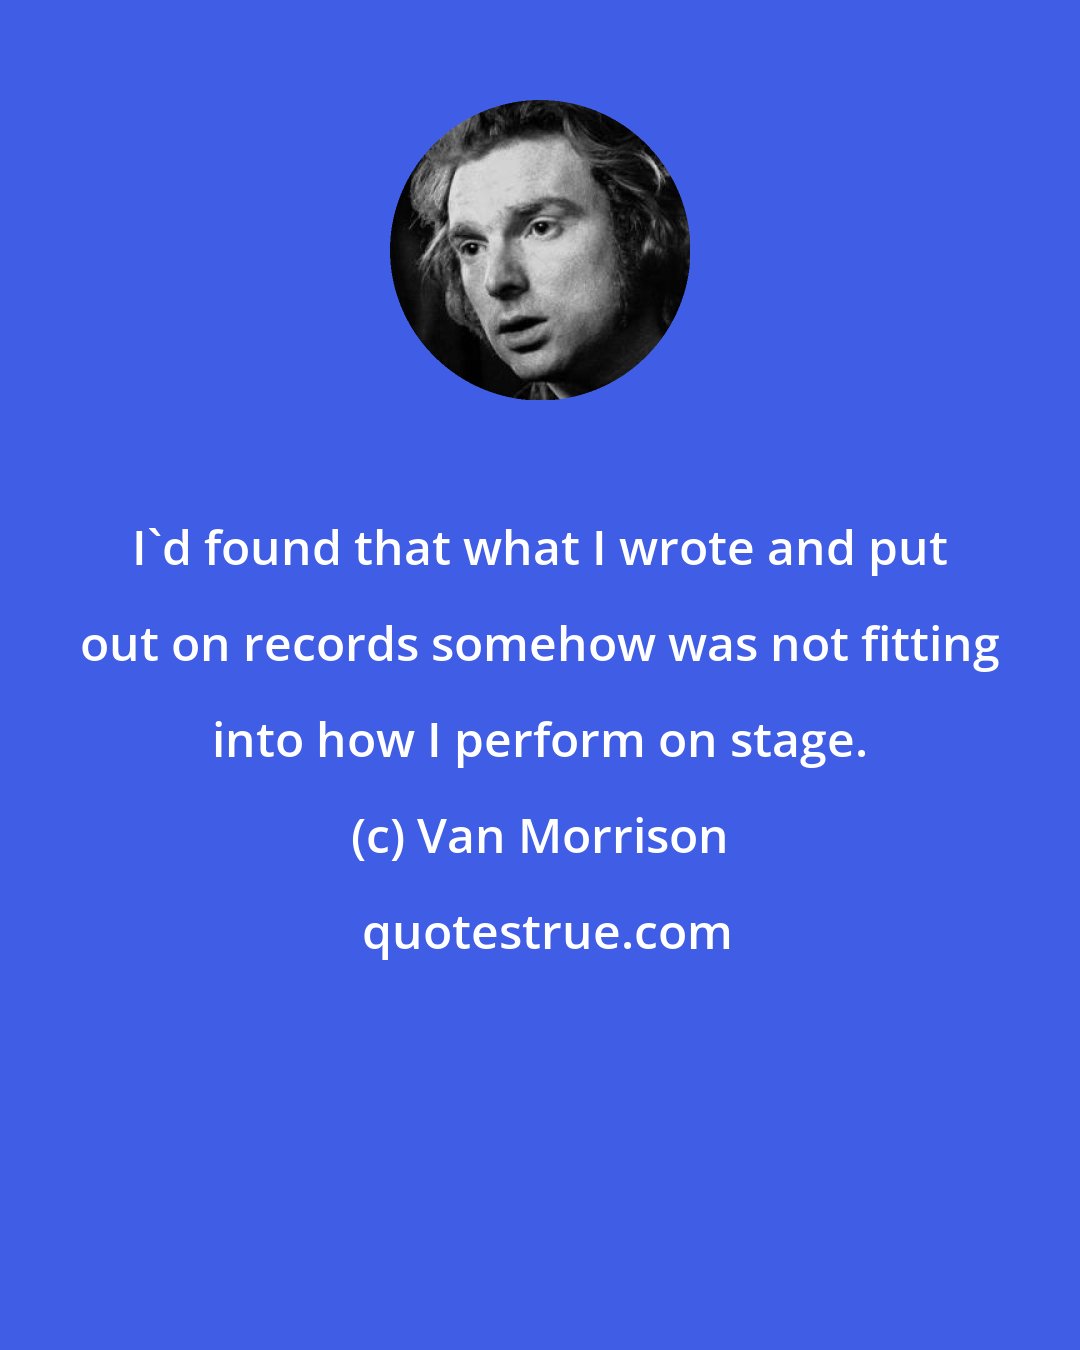 Van Morrison: I'd found that what I wrote and put out on records somehow was not fitting into how I perform on stage.